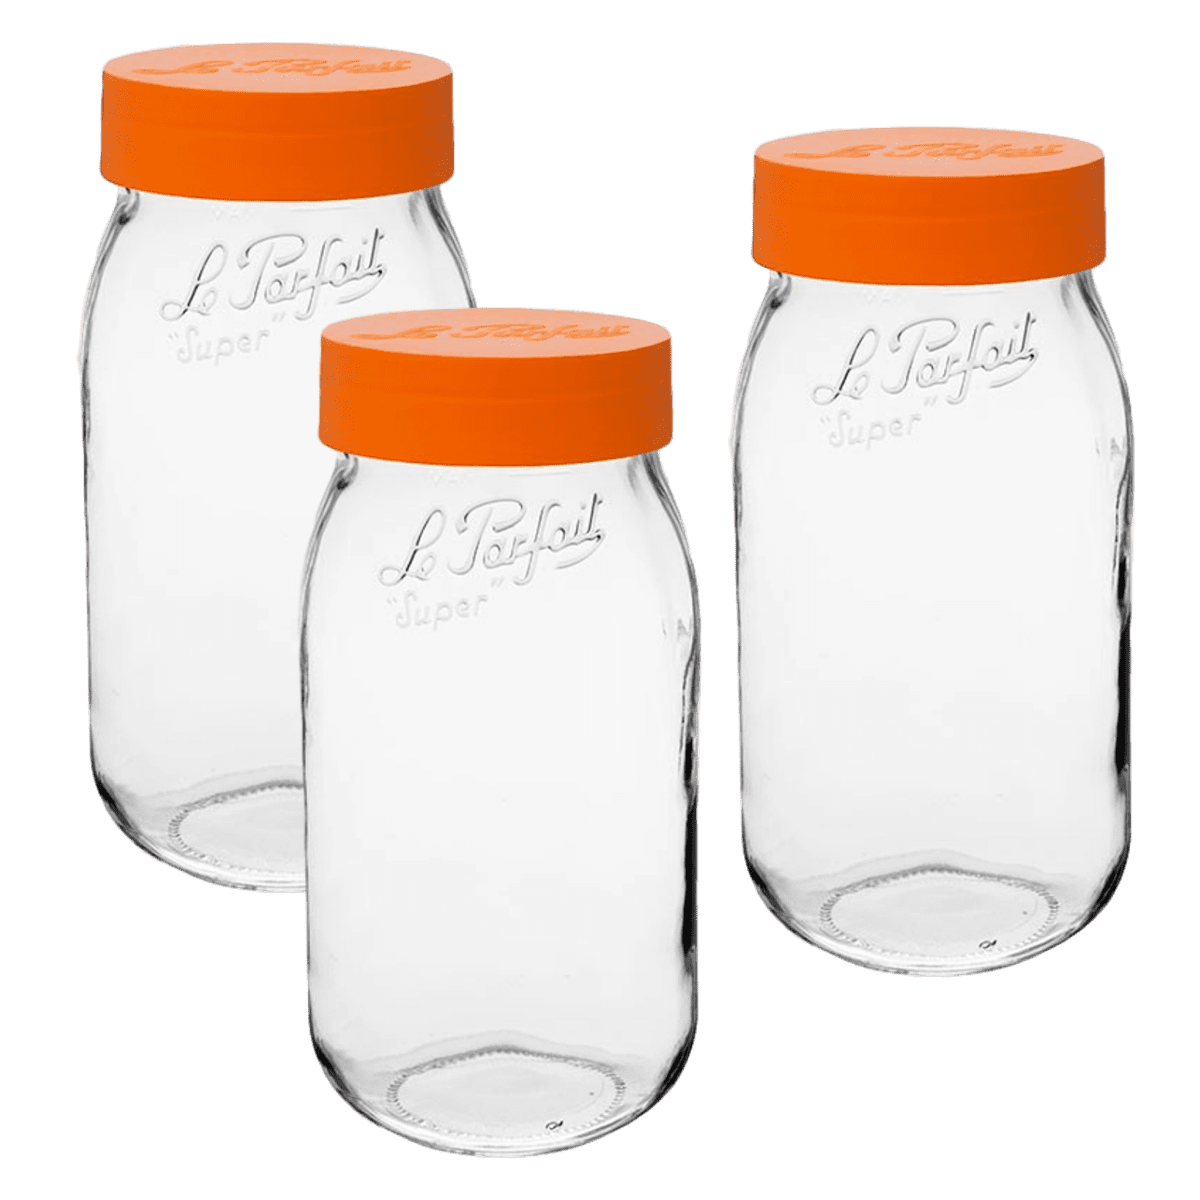 Le Parfait Screw Top Jars – Large French Glass Jars For Pantry Storage  Preserving Bulk Goods, 3 pk ORN / 96 fl oz - Dillons Food Stores